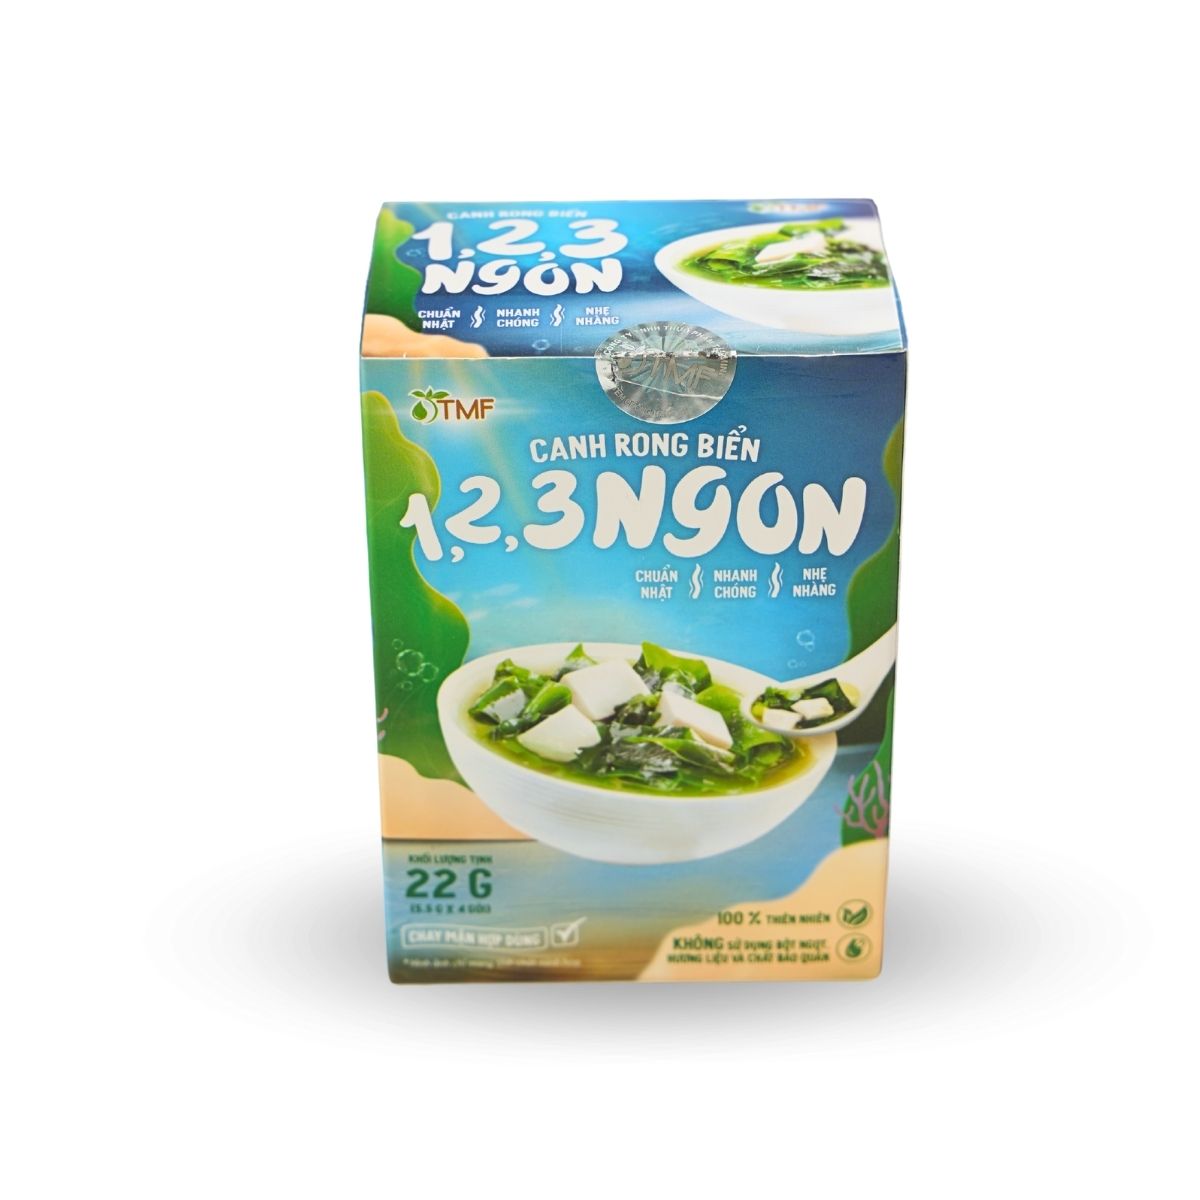 Instant Wakame Soup